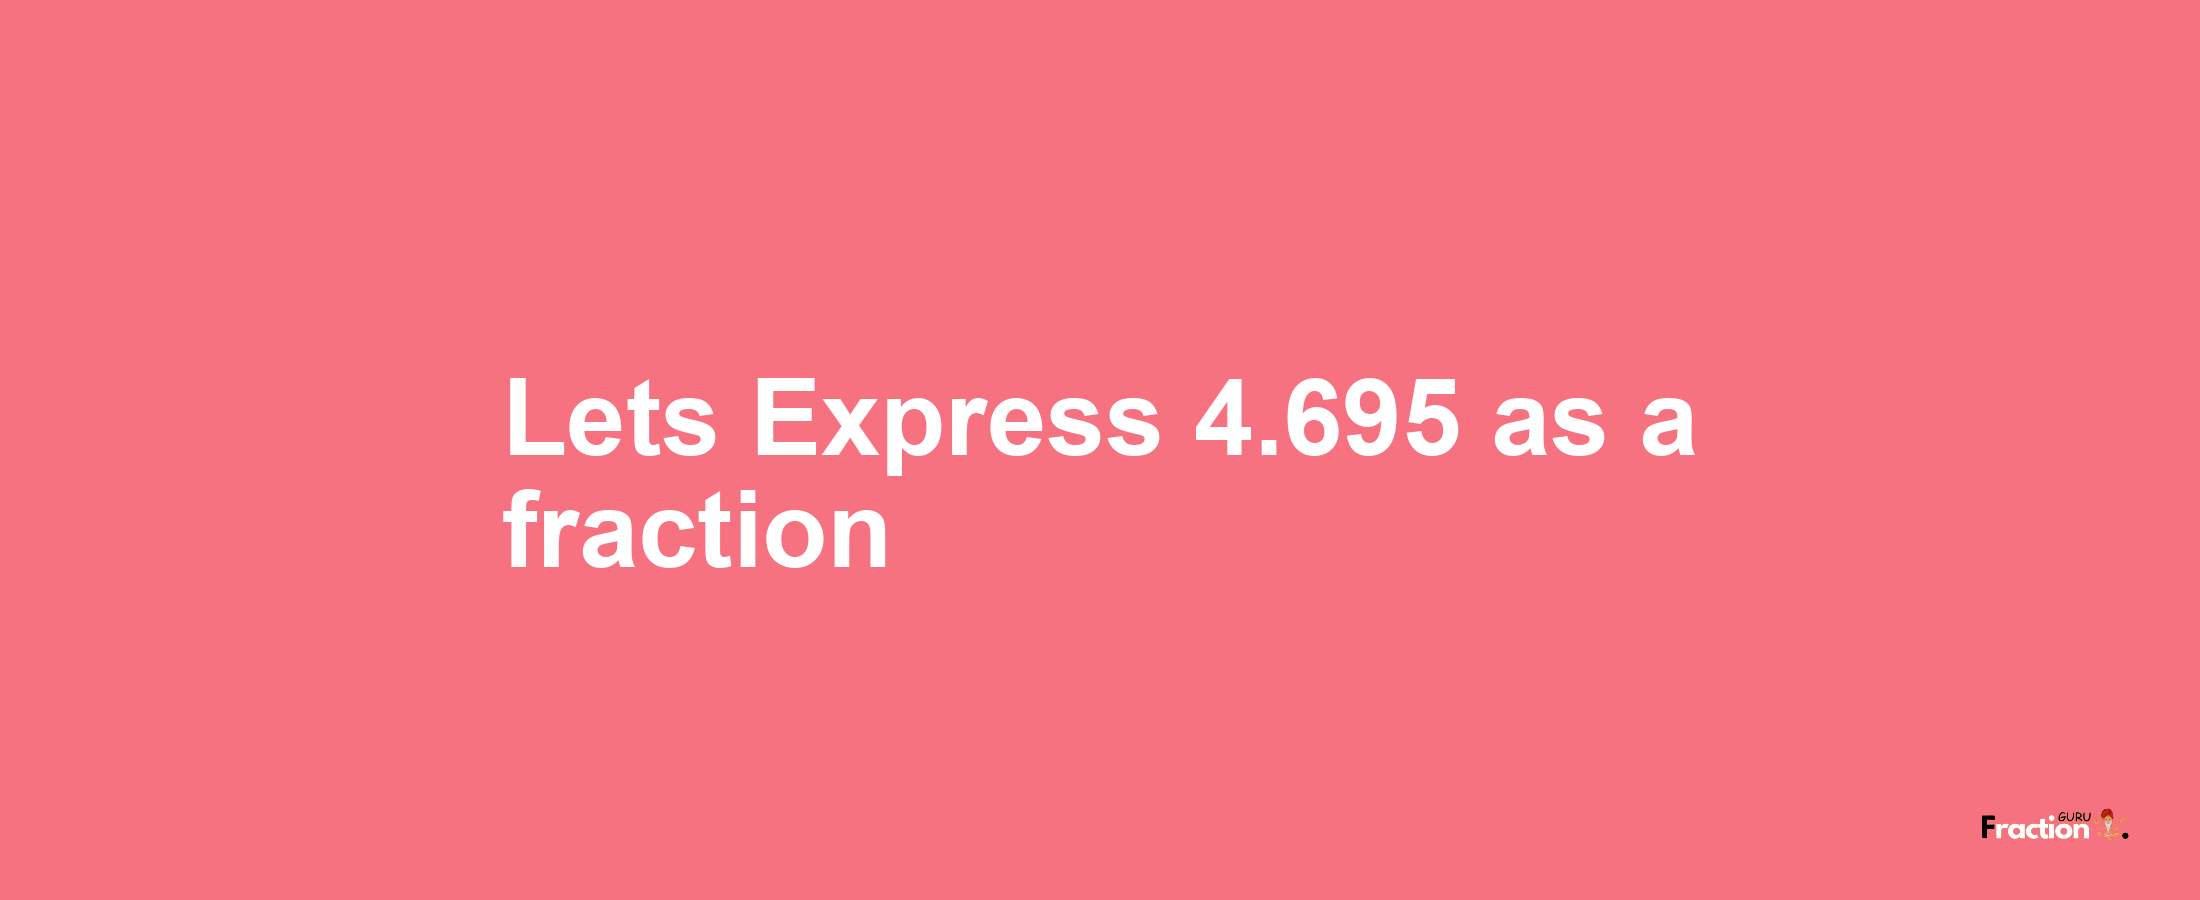 Lets Express 4.695 as afraction